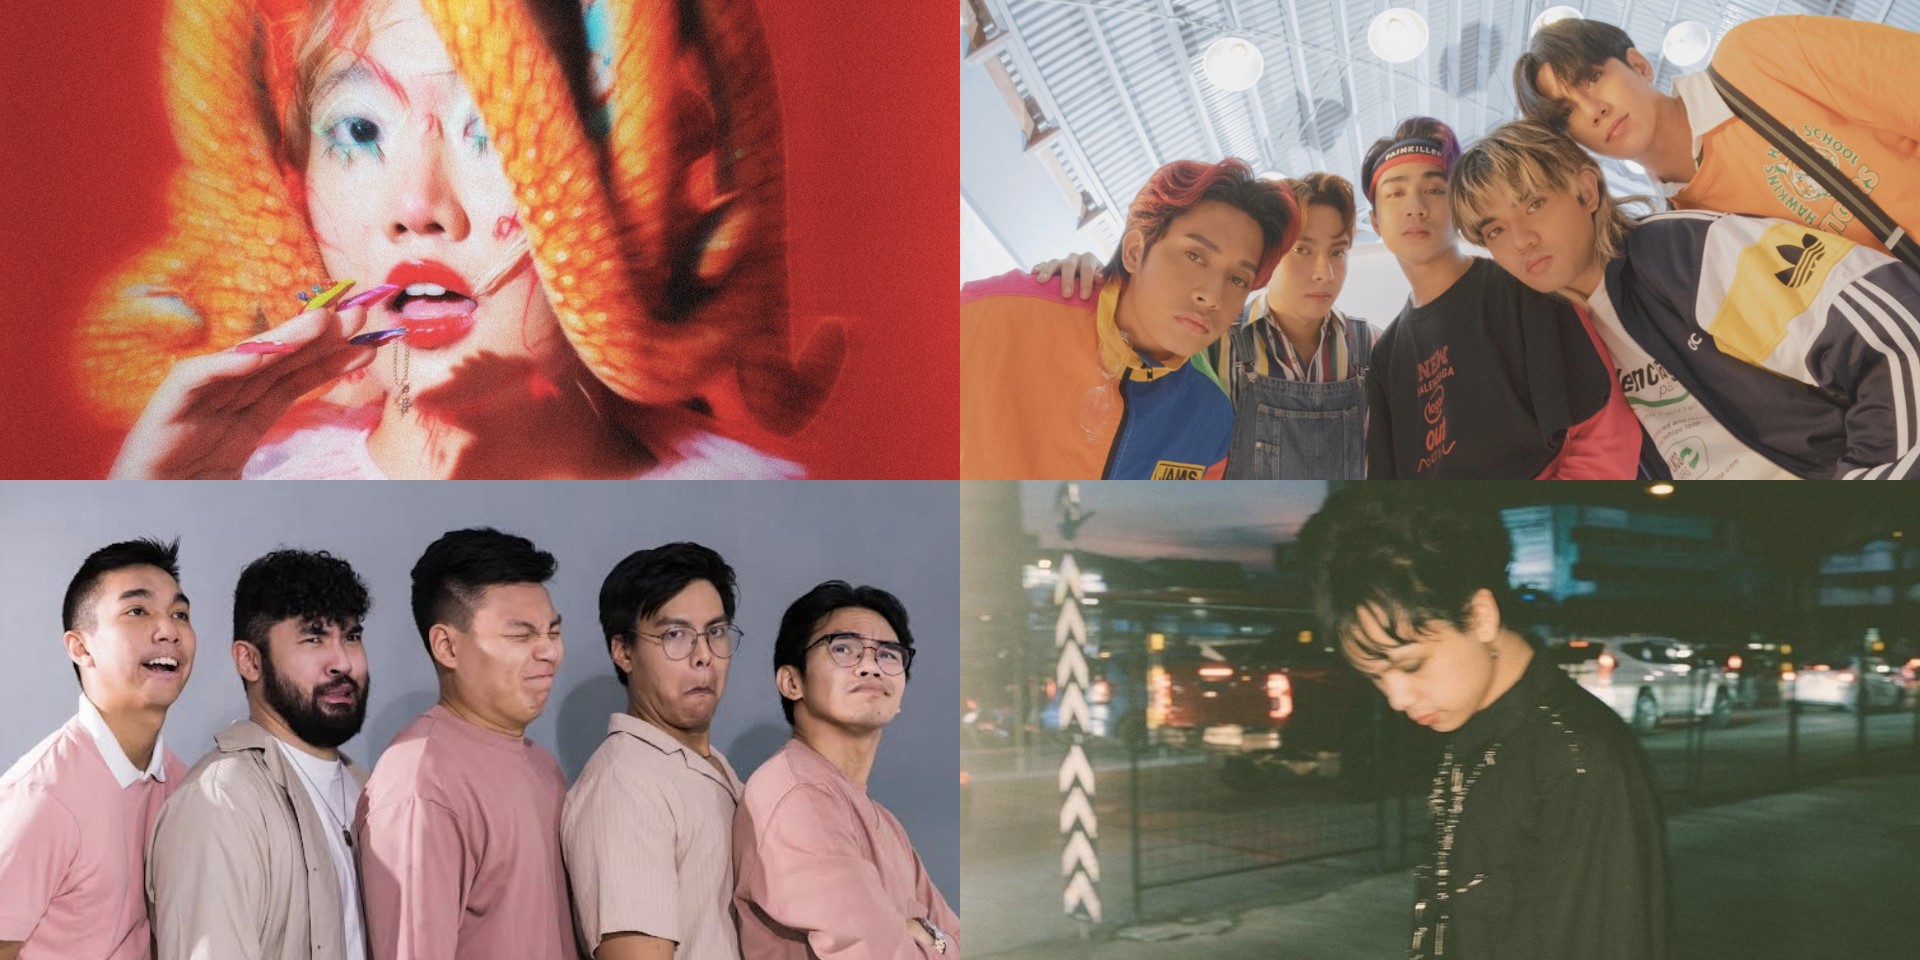 SB19, ena mori, Lola Amour, Zild, and more nominated at the 8th Wish Music Awards